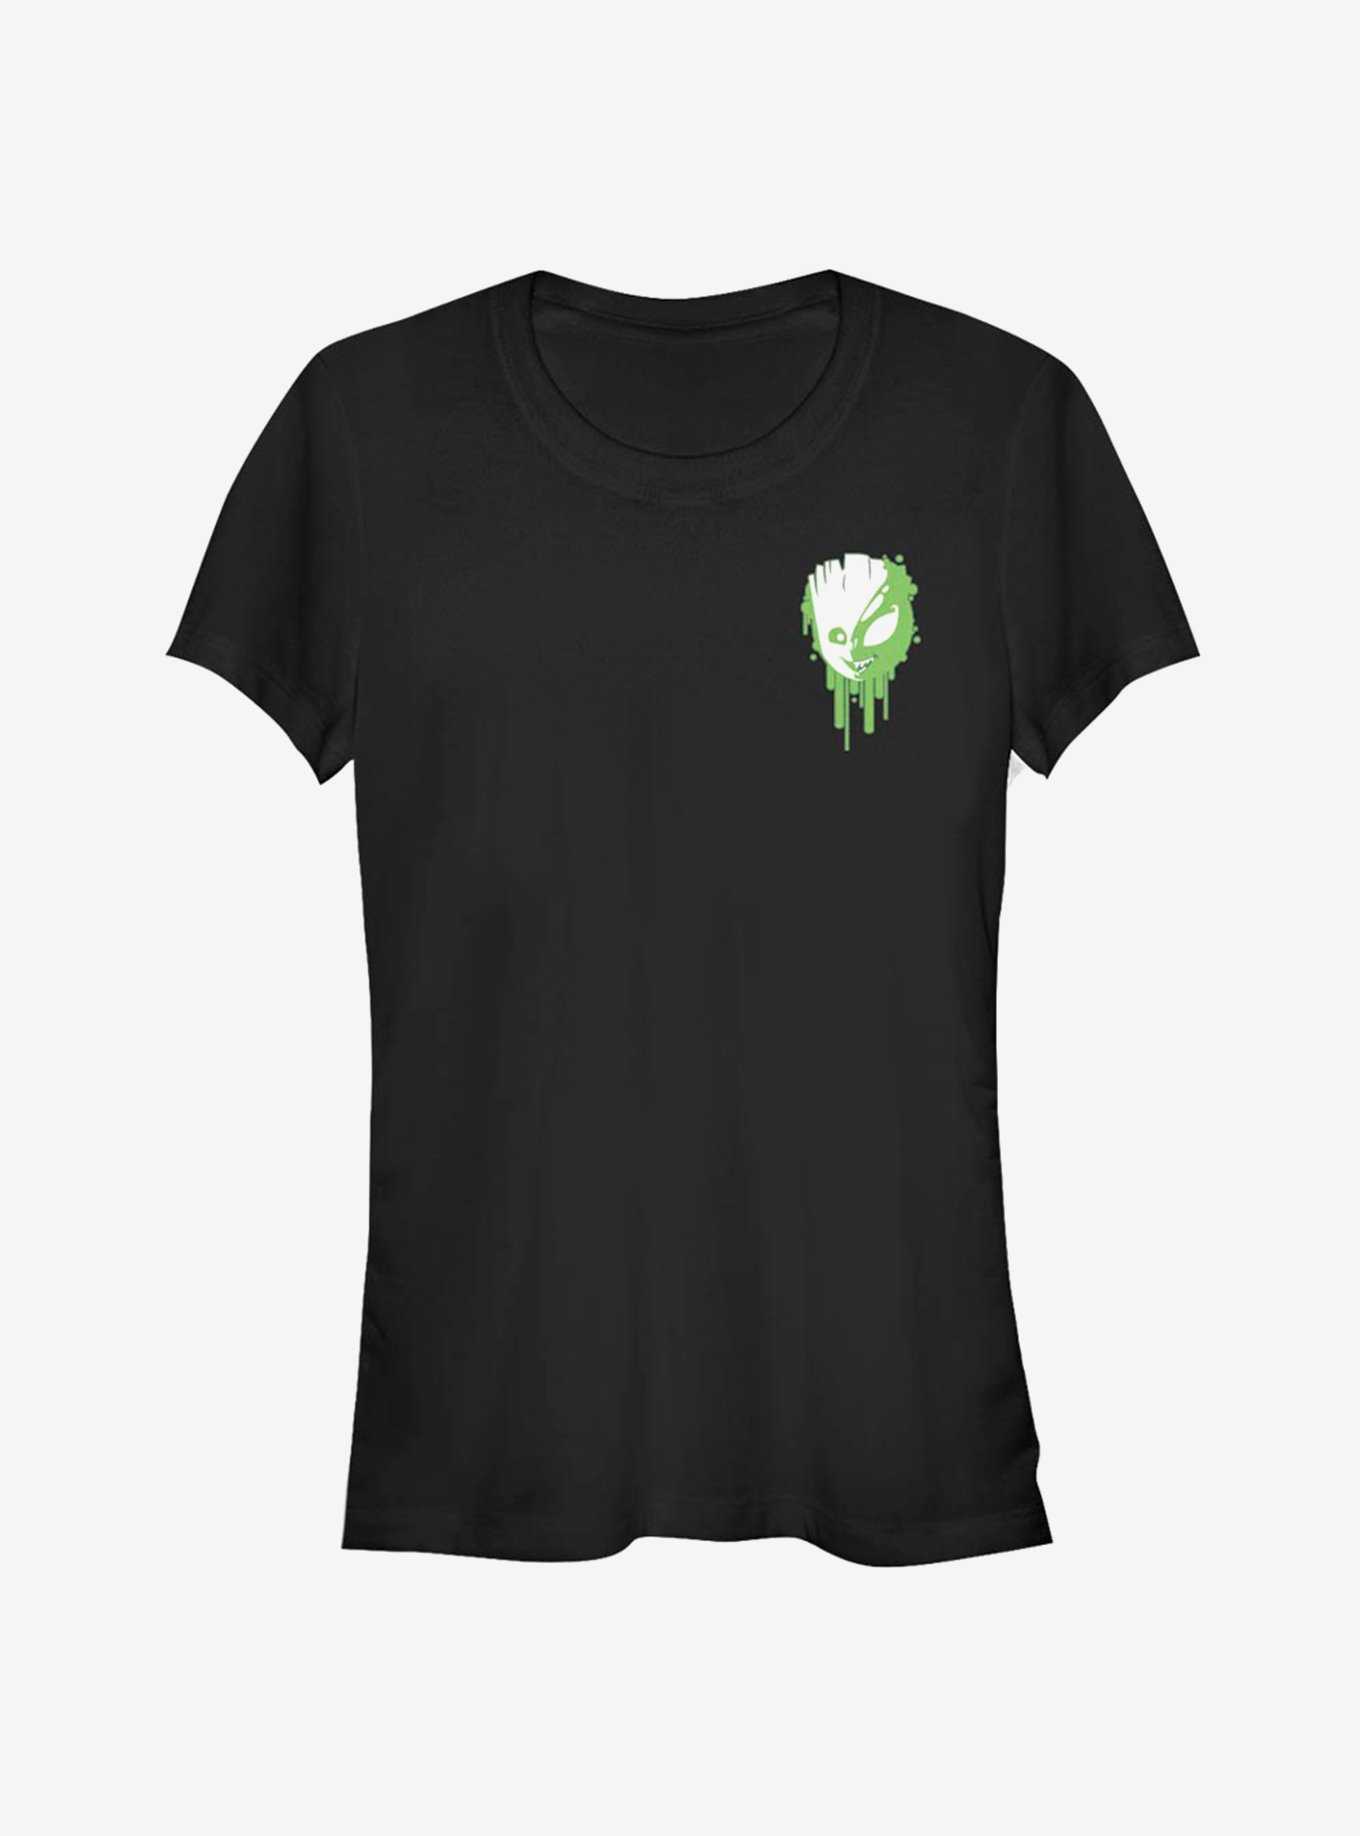 Marvel Guardians Of The Galaxy Groot Venomized Drip Icon Girls T-Shirt, , hi-res